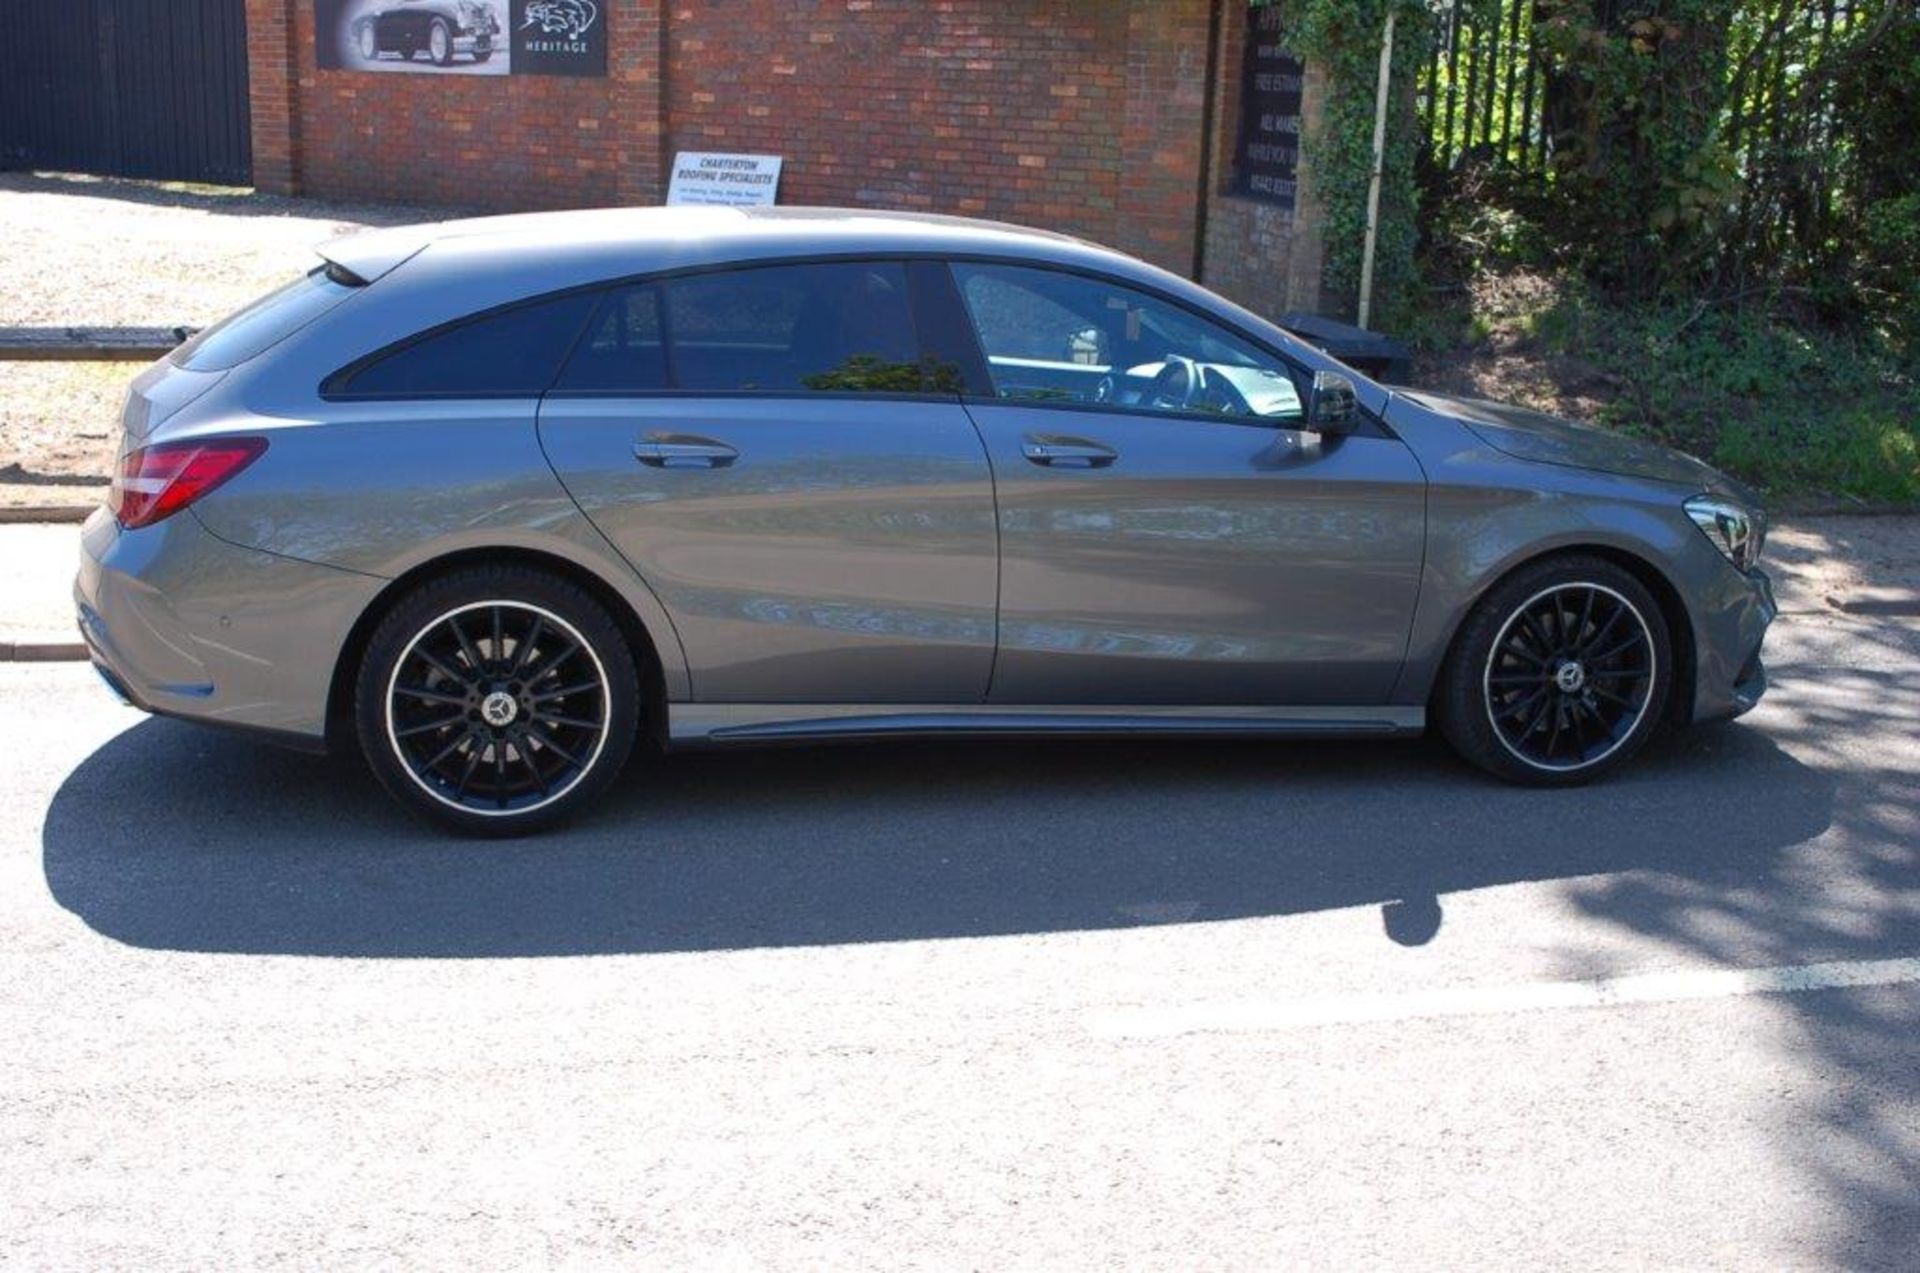 Mercedes Benz CLA 220 D AMG LINE AUTOMATIC DIESEL - Image 4 of 6